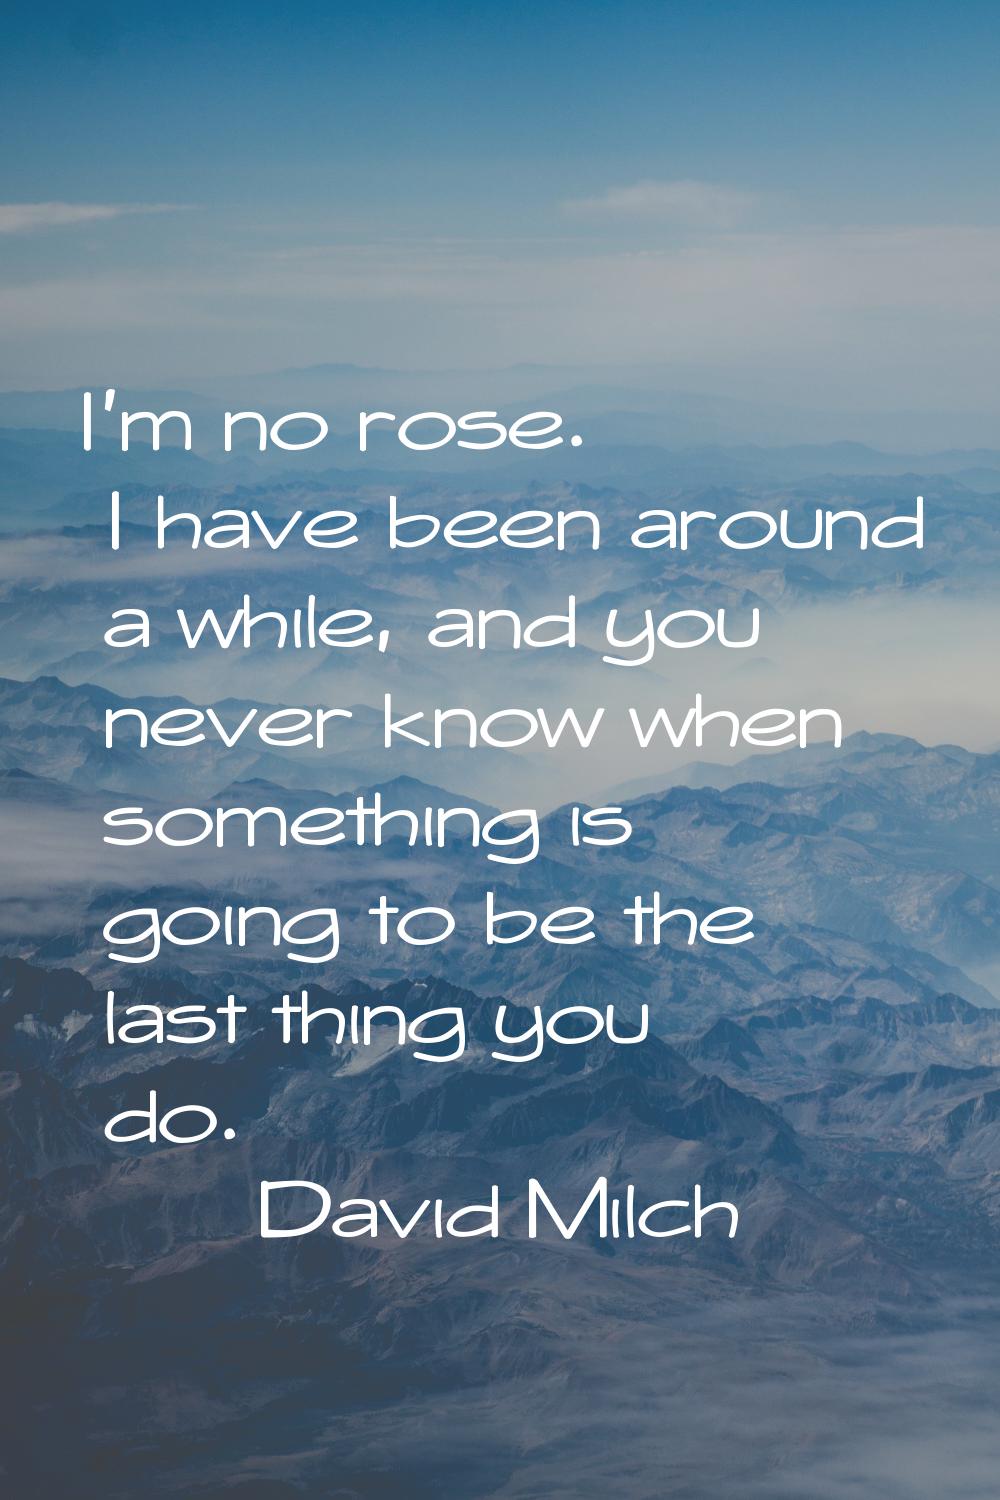 I'm no rose. I have been around a while, and you never know when something is going to be the last 